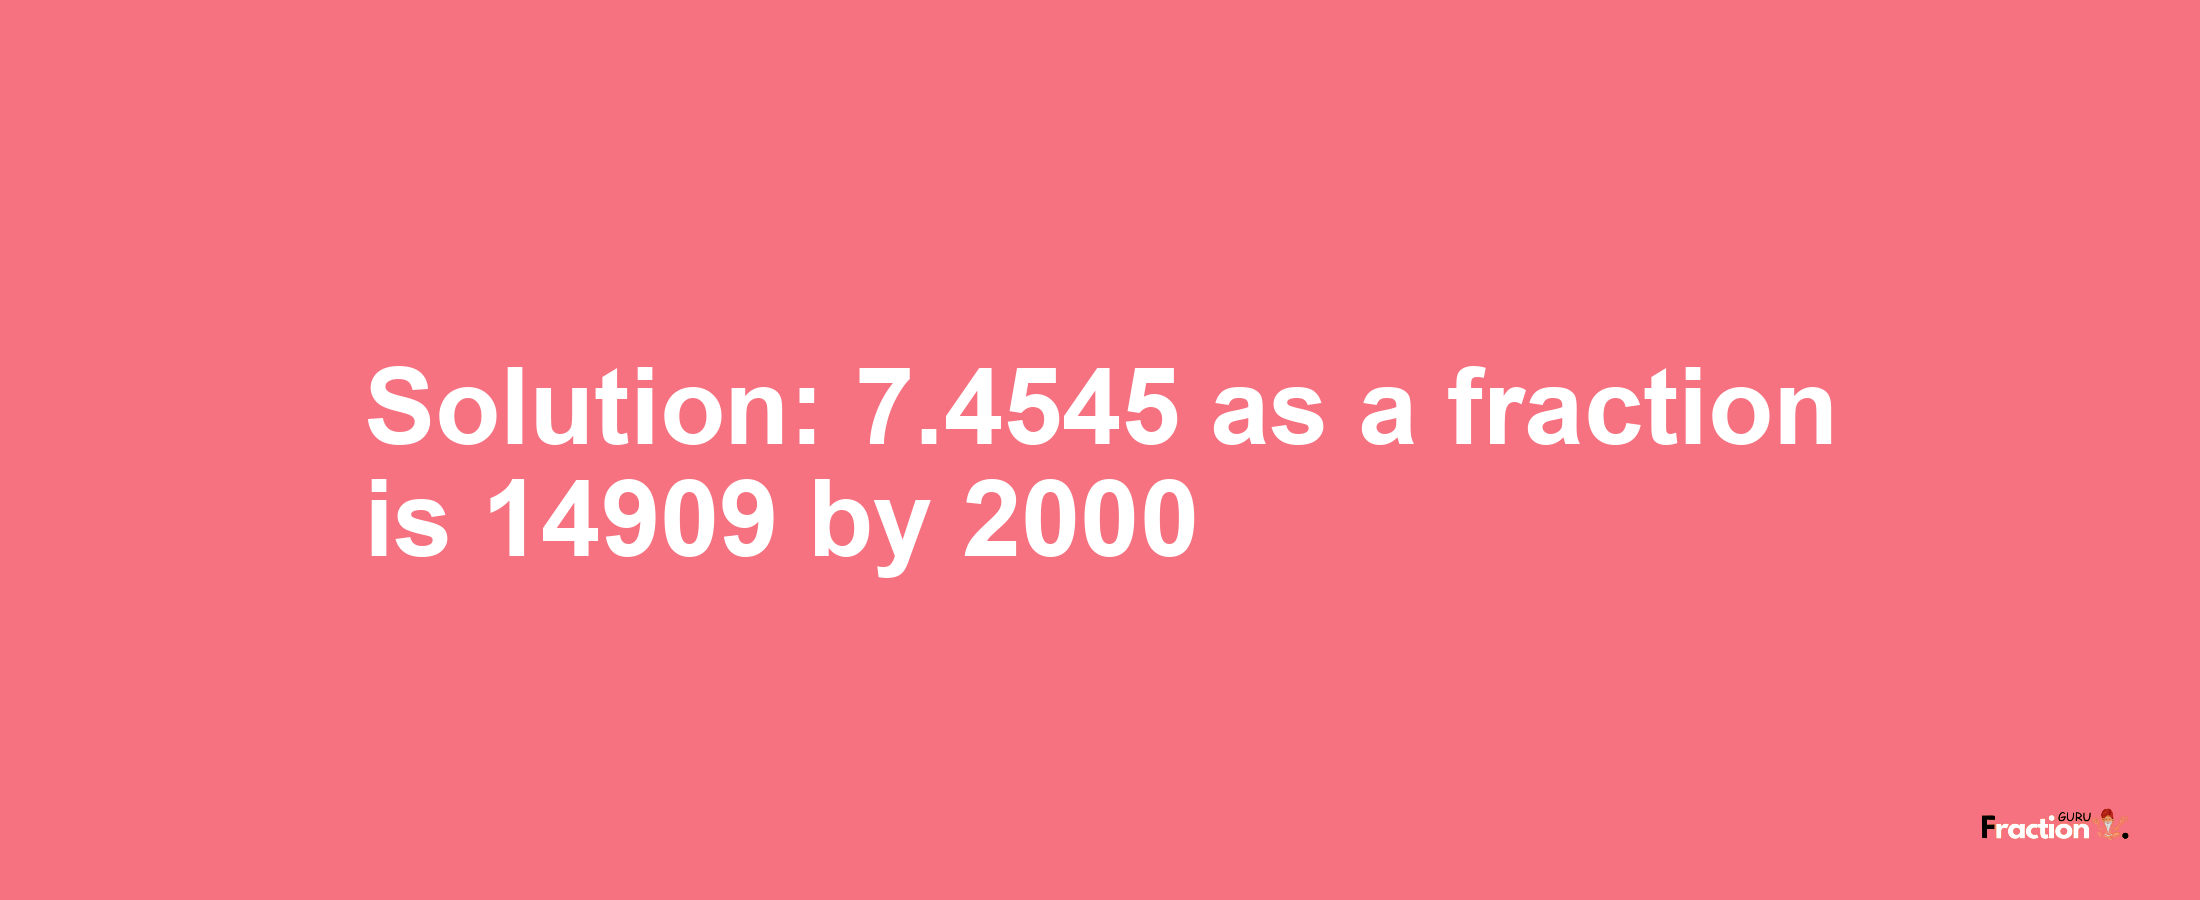 Solution:7.4545 as a fraction is 14909/2000